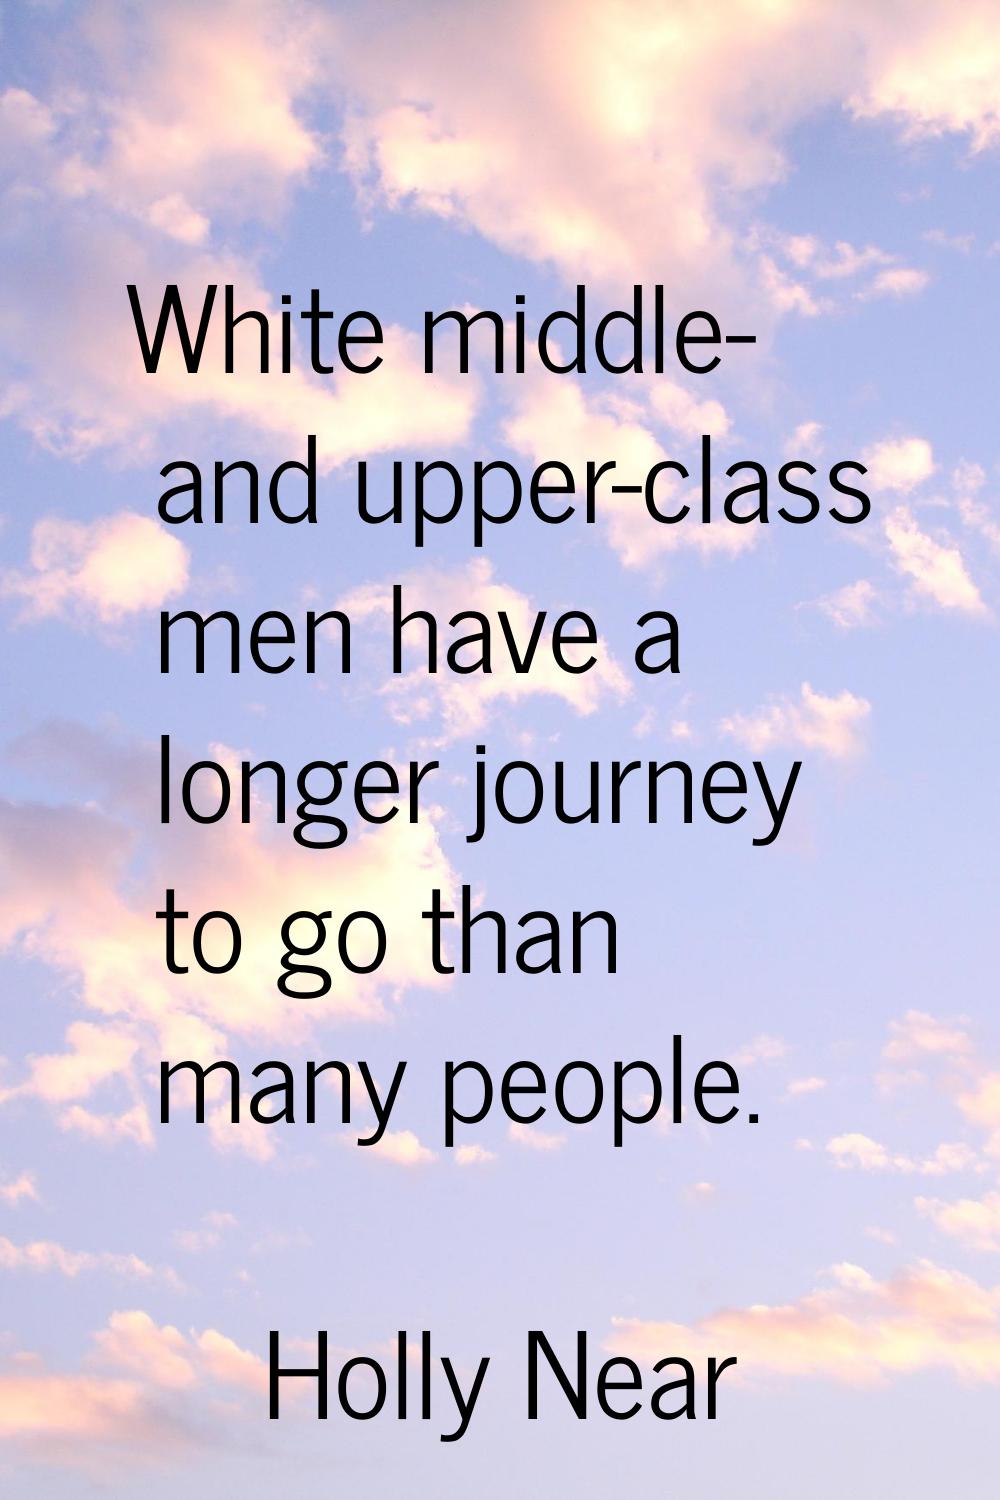 White middle- and upper-class men have a longer journey to go than many people.